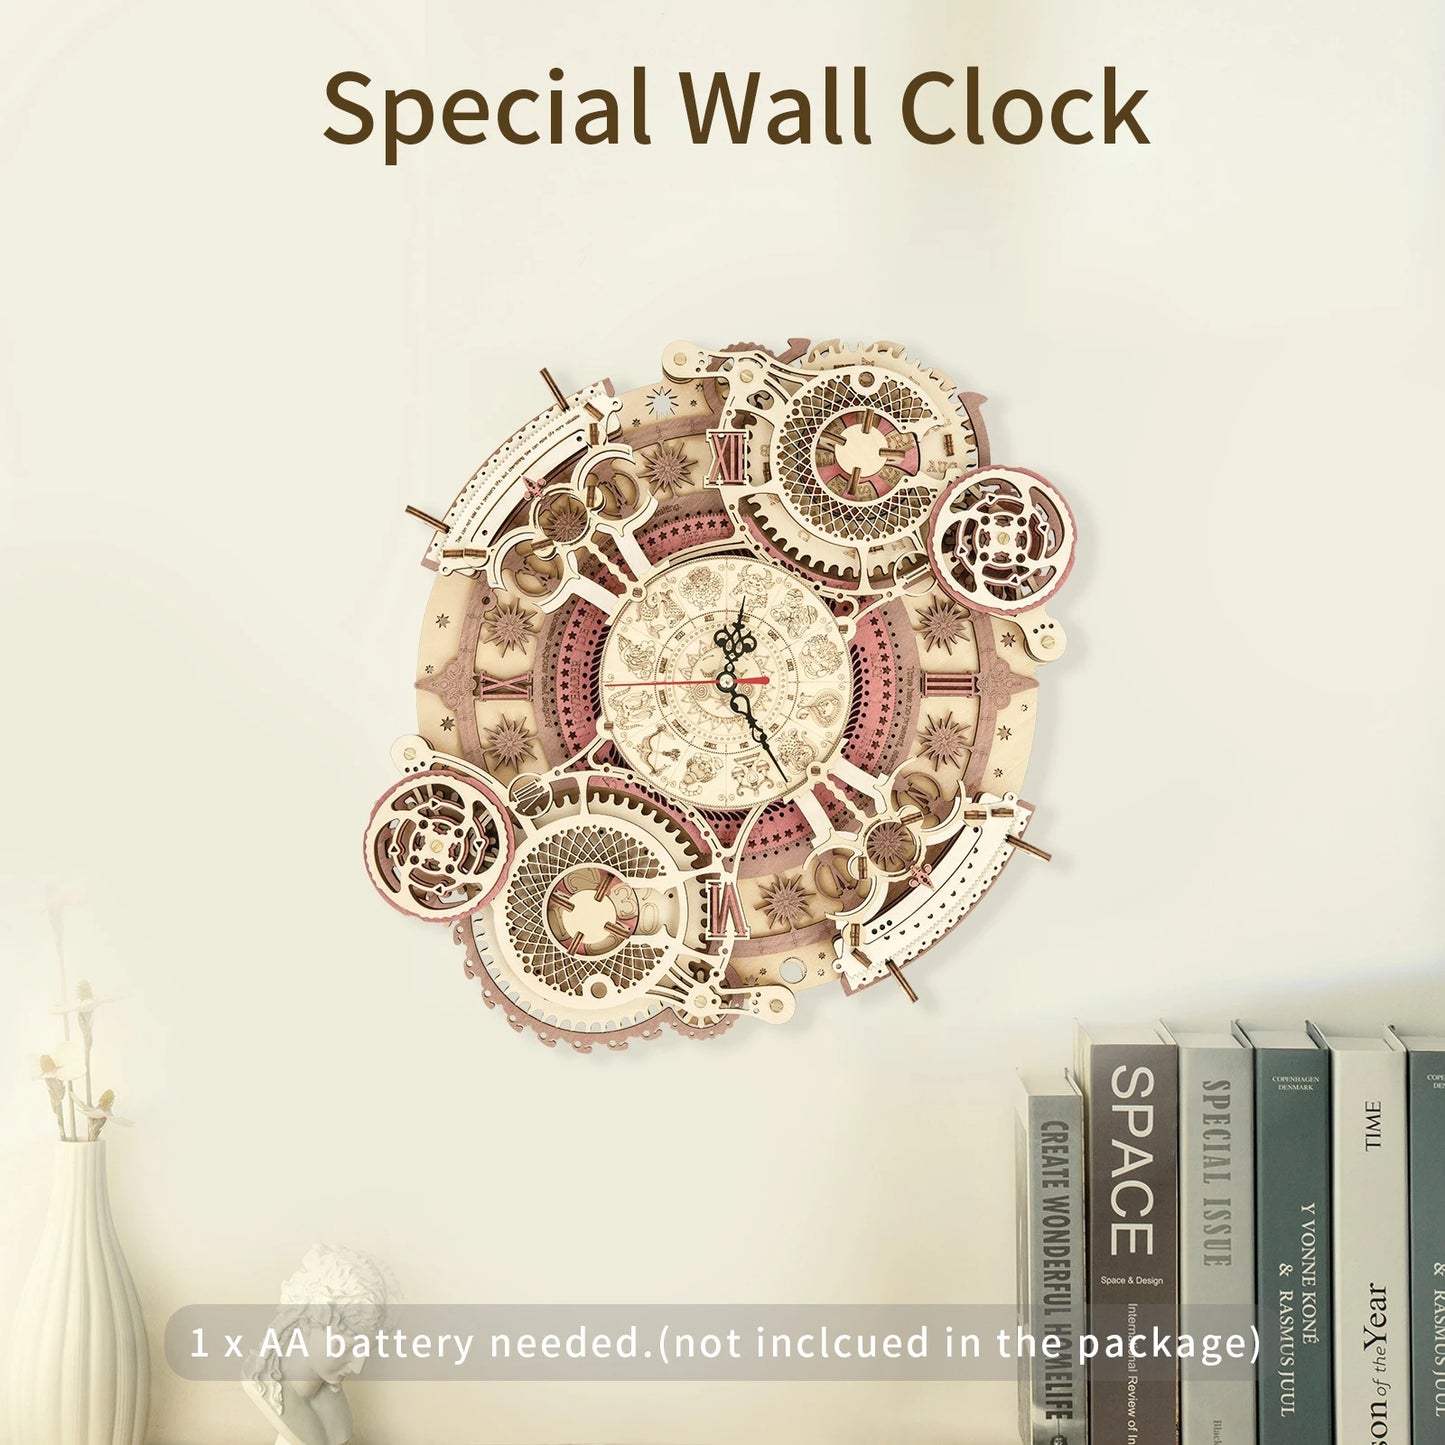 Robotime ROKR Zodiac Wall Clock 3D Wooden Puzzle Model Assembly Toys Gifts for Children Kids Teens LC601